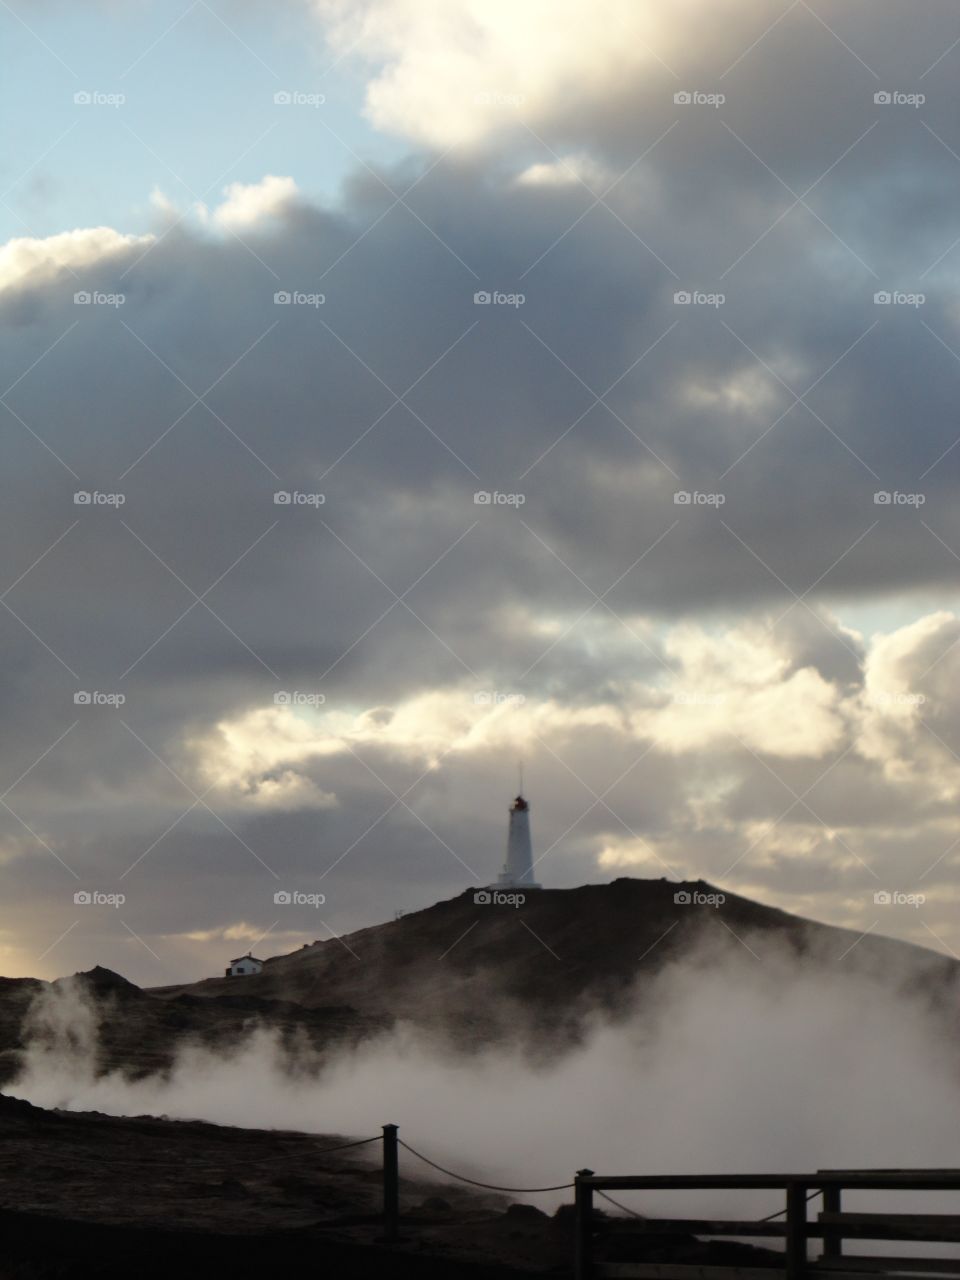 Lighthouse in the mist 